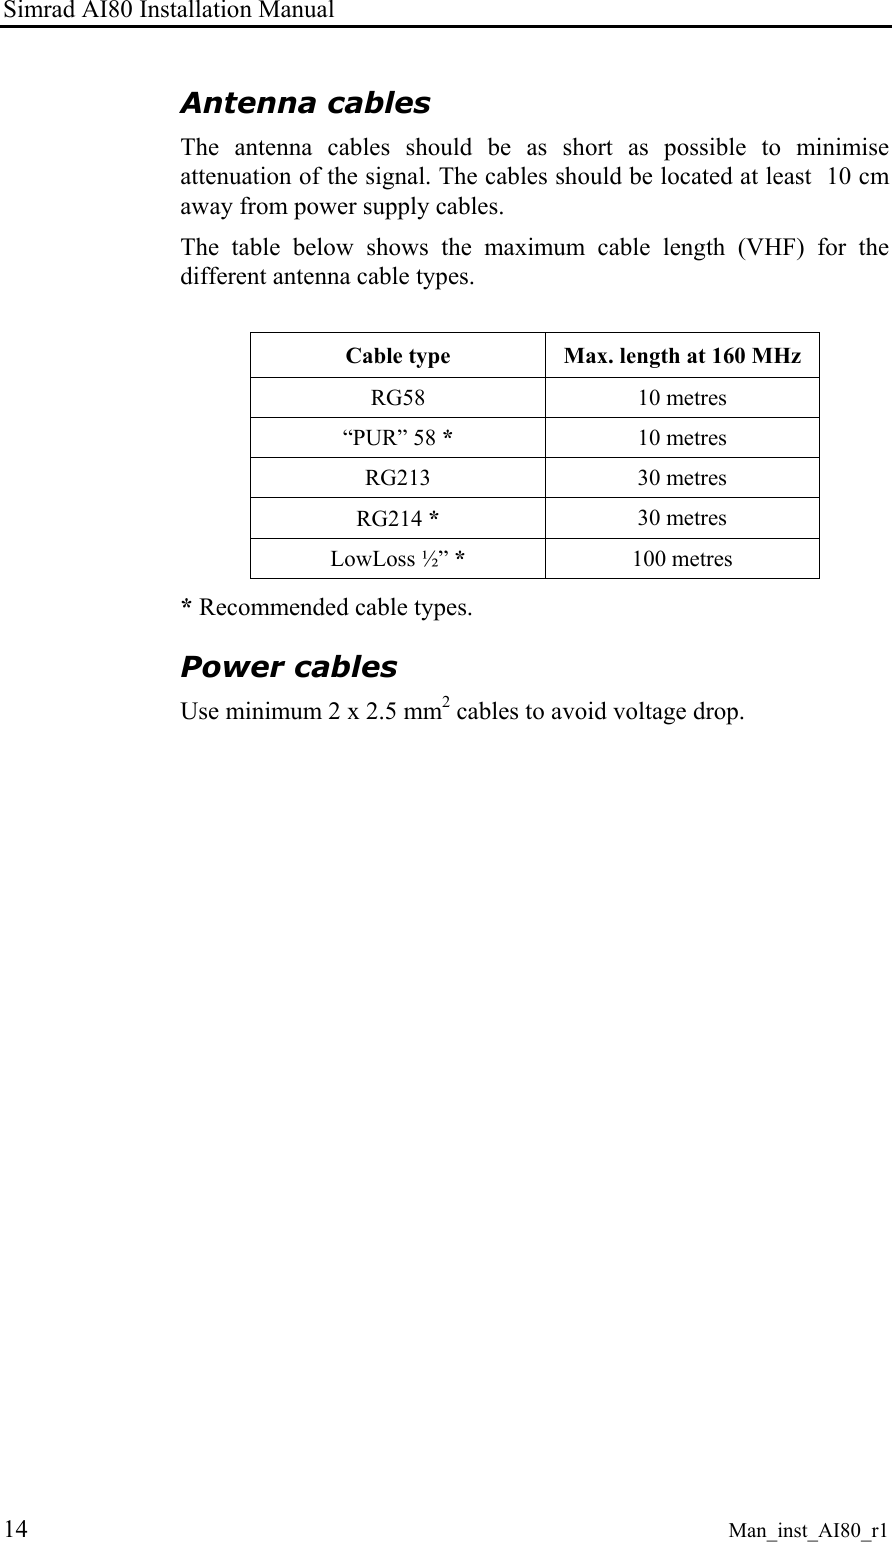 Simrad AI80 Installation Manual  14 Man_inst_AI80_r1 Antenna cables The antenna cables should be as short as possible to minimise attenuation of the signal. The cables should be located at least  10 cm away from power supply cables. The table below shows the maximum cable length (VHF) for the different antenna cable types.  Cable type  Max. length at 160 MHz RG58 10 metres “PUR” 58 * 10 metres RG213 30 metres RG214 * 30 metres LowLoss ½” * 100 metres * Recommended cable types.  Power cables Use minimum 2 x 2.5 mm2 cables to avoid voltage drop. 